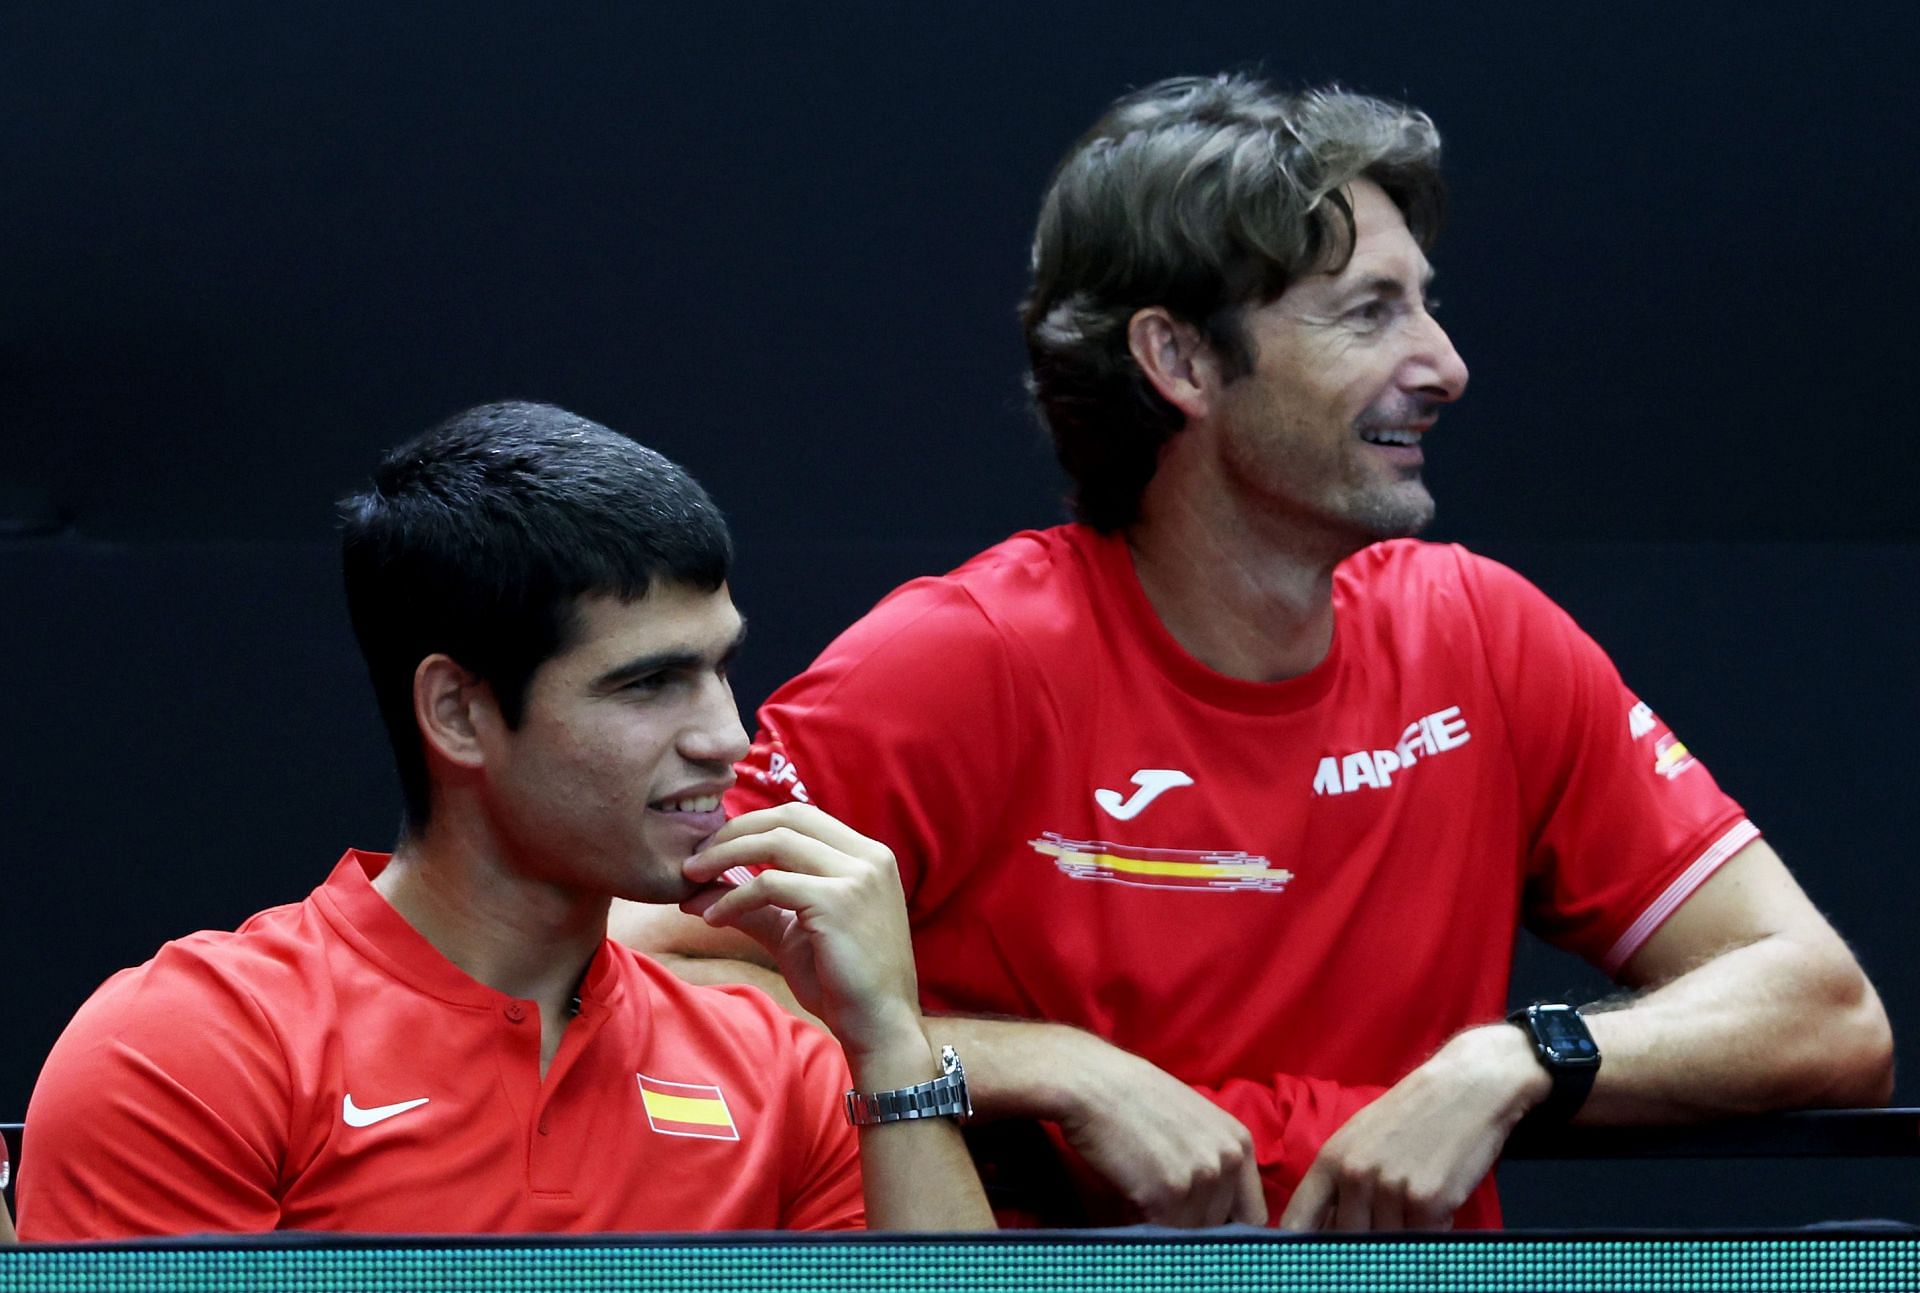 The Spanish duo at the 2022 Davis Cup